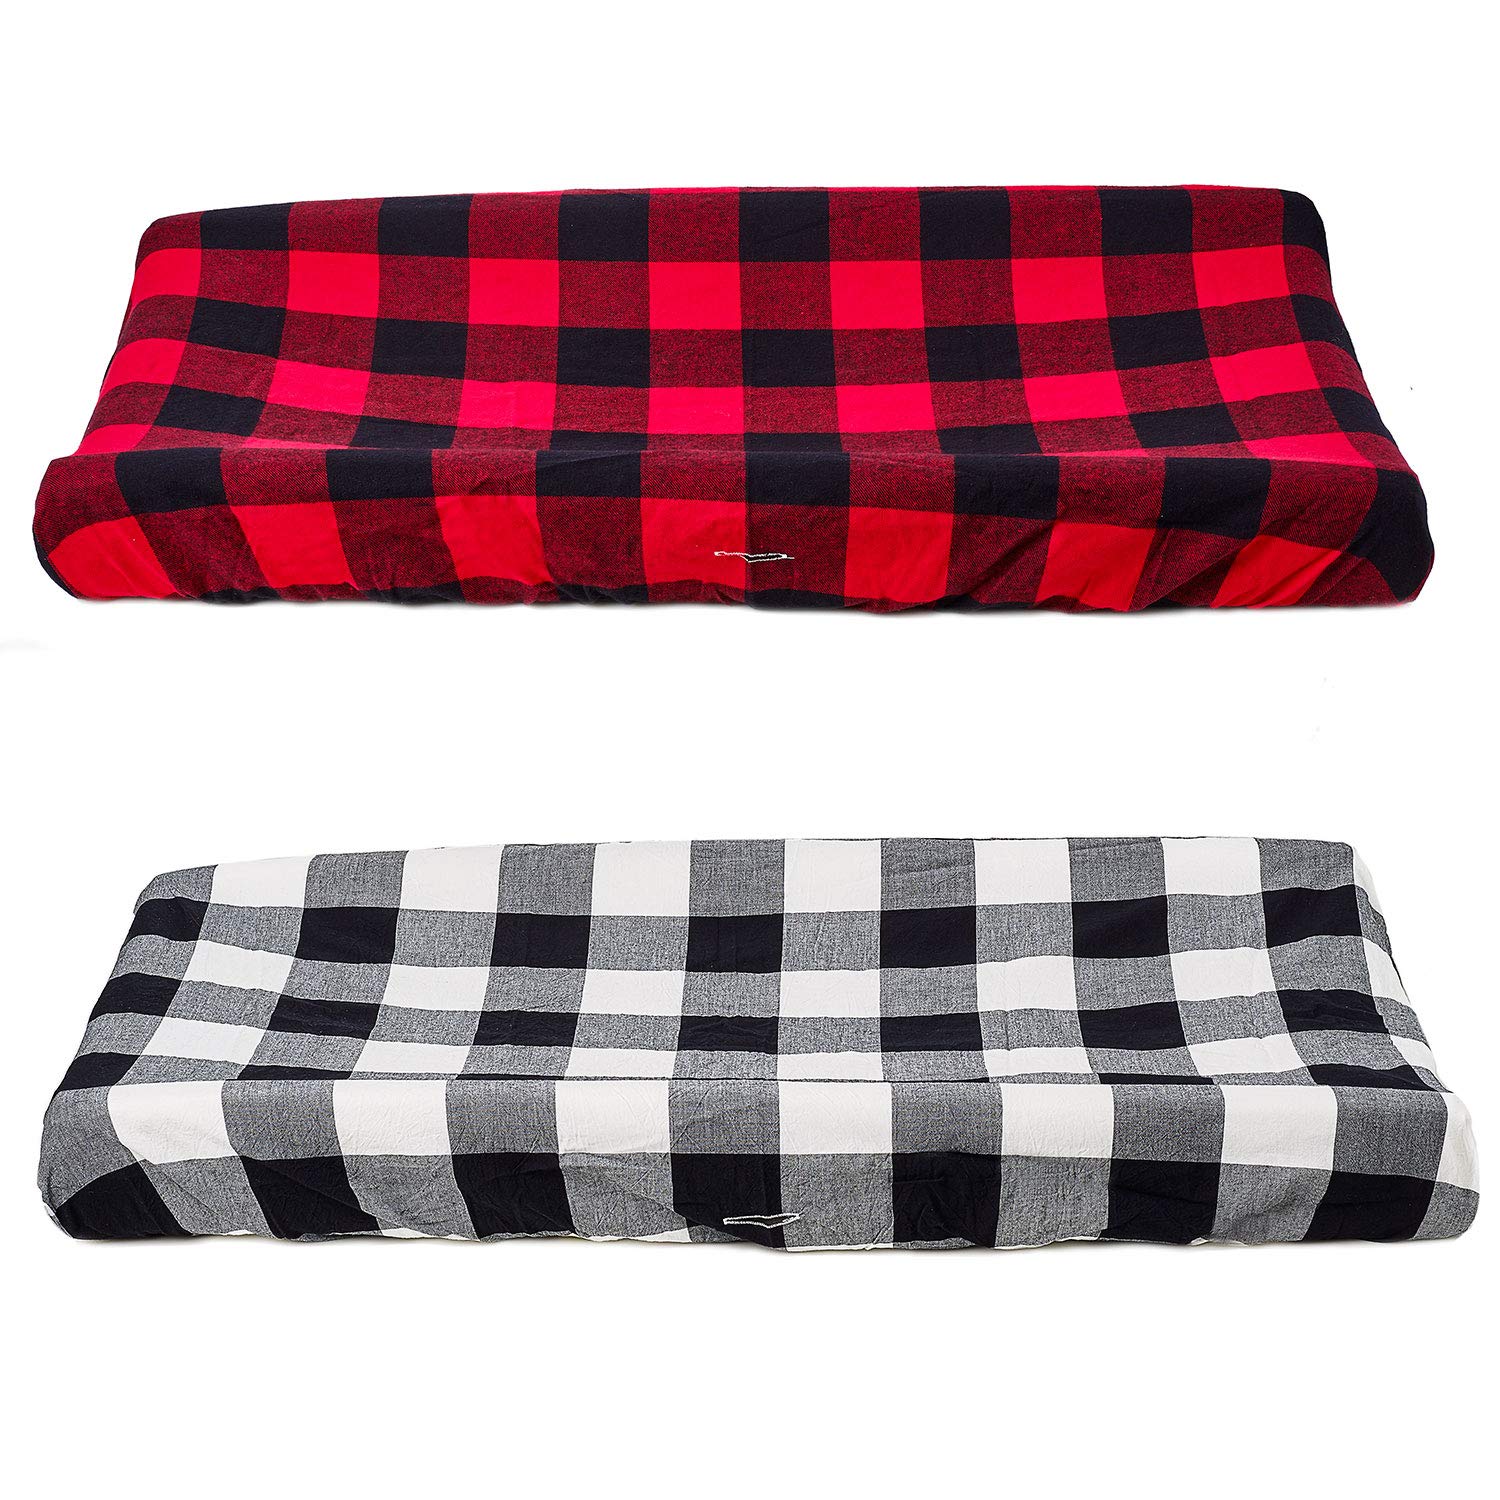 Org Store Premium Buffalo Check Changing Pad Cover Set | 100% Cotton Universal Plaid Changing Table Pad Cover 2-Pack